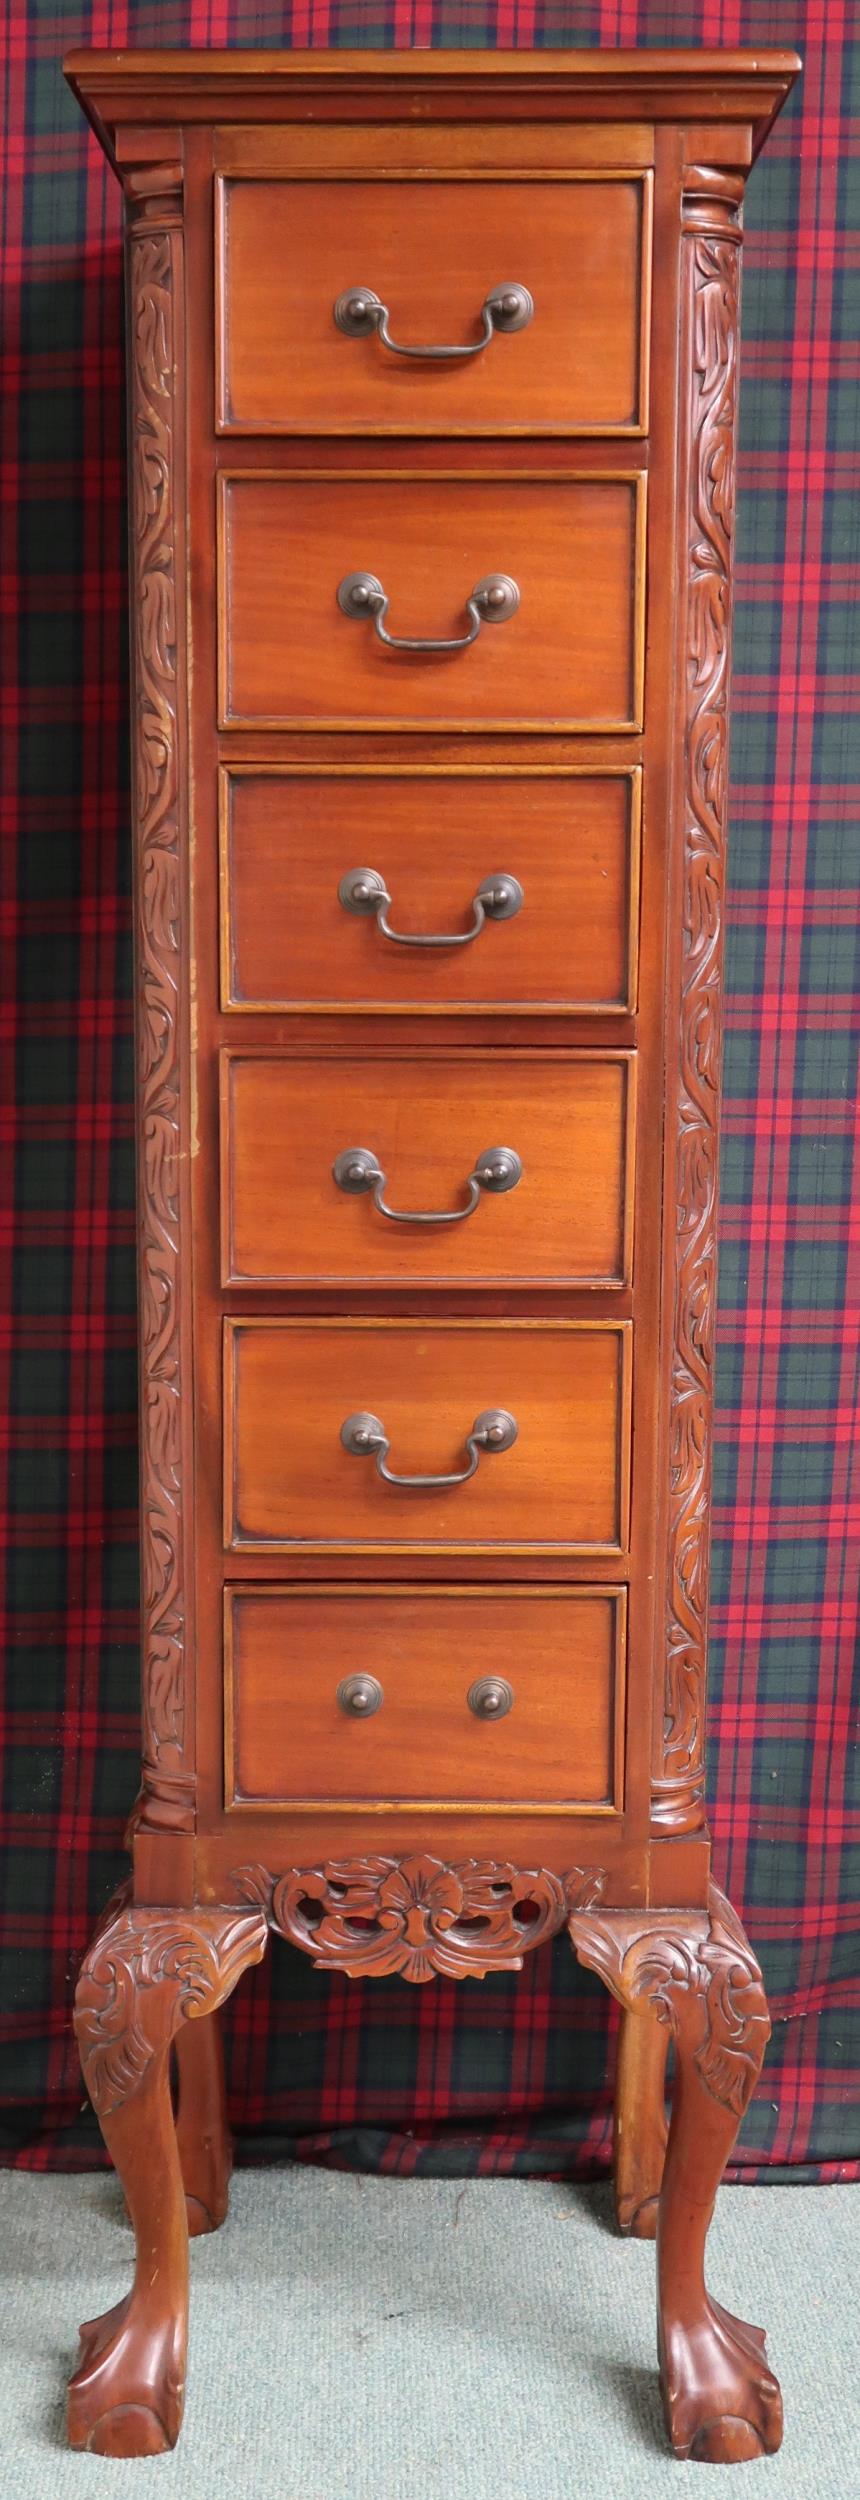 A 20th century mahogany tall boy chest with six drawers flanked by carved reliefs on ball and claw